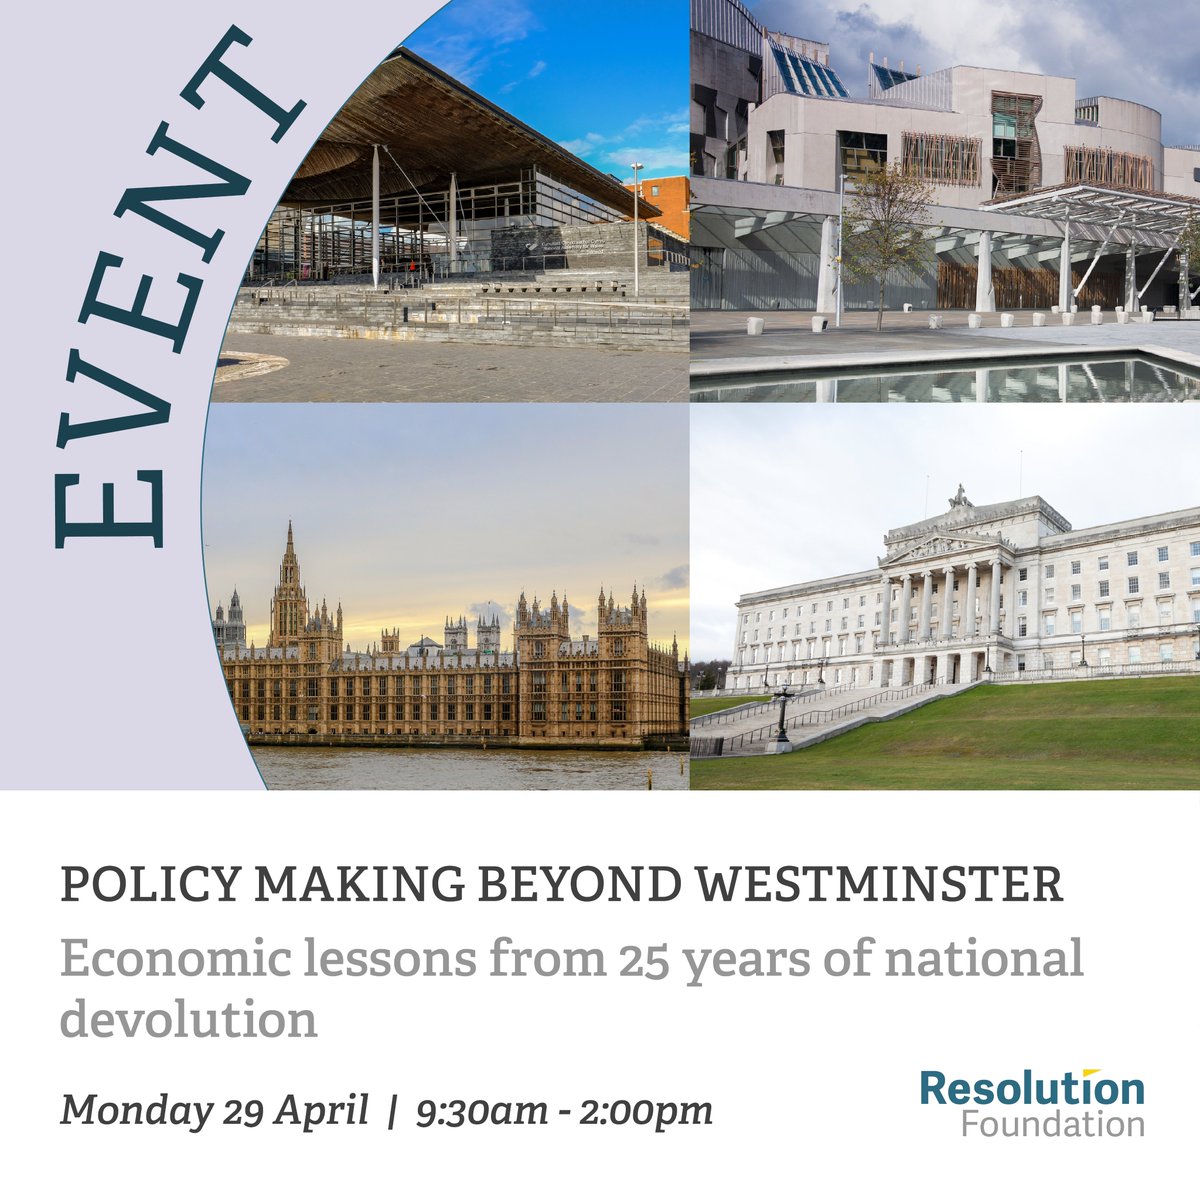 Economic lessons from 25 years of national devolution: tomorrow we're hosting a major conference, in partnership with PolicyWISE, to celebrate the 25th anniversary of devolution to Scotland, Wales and Northern Ireland. Sign up to watch live here: resolutionfoundation.org/events/policy-…